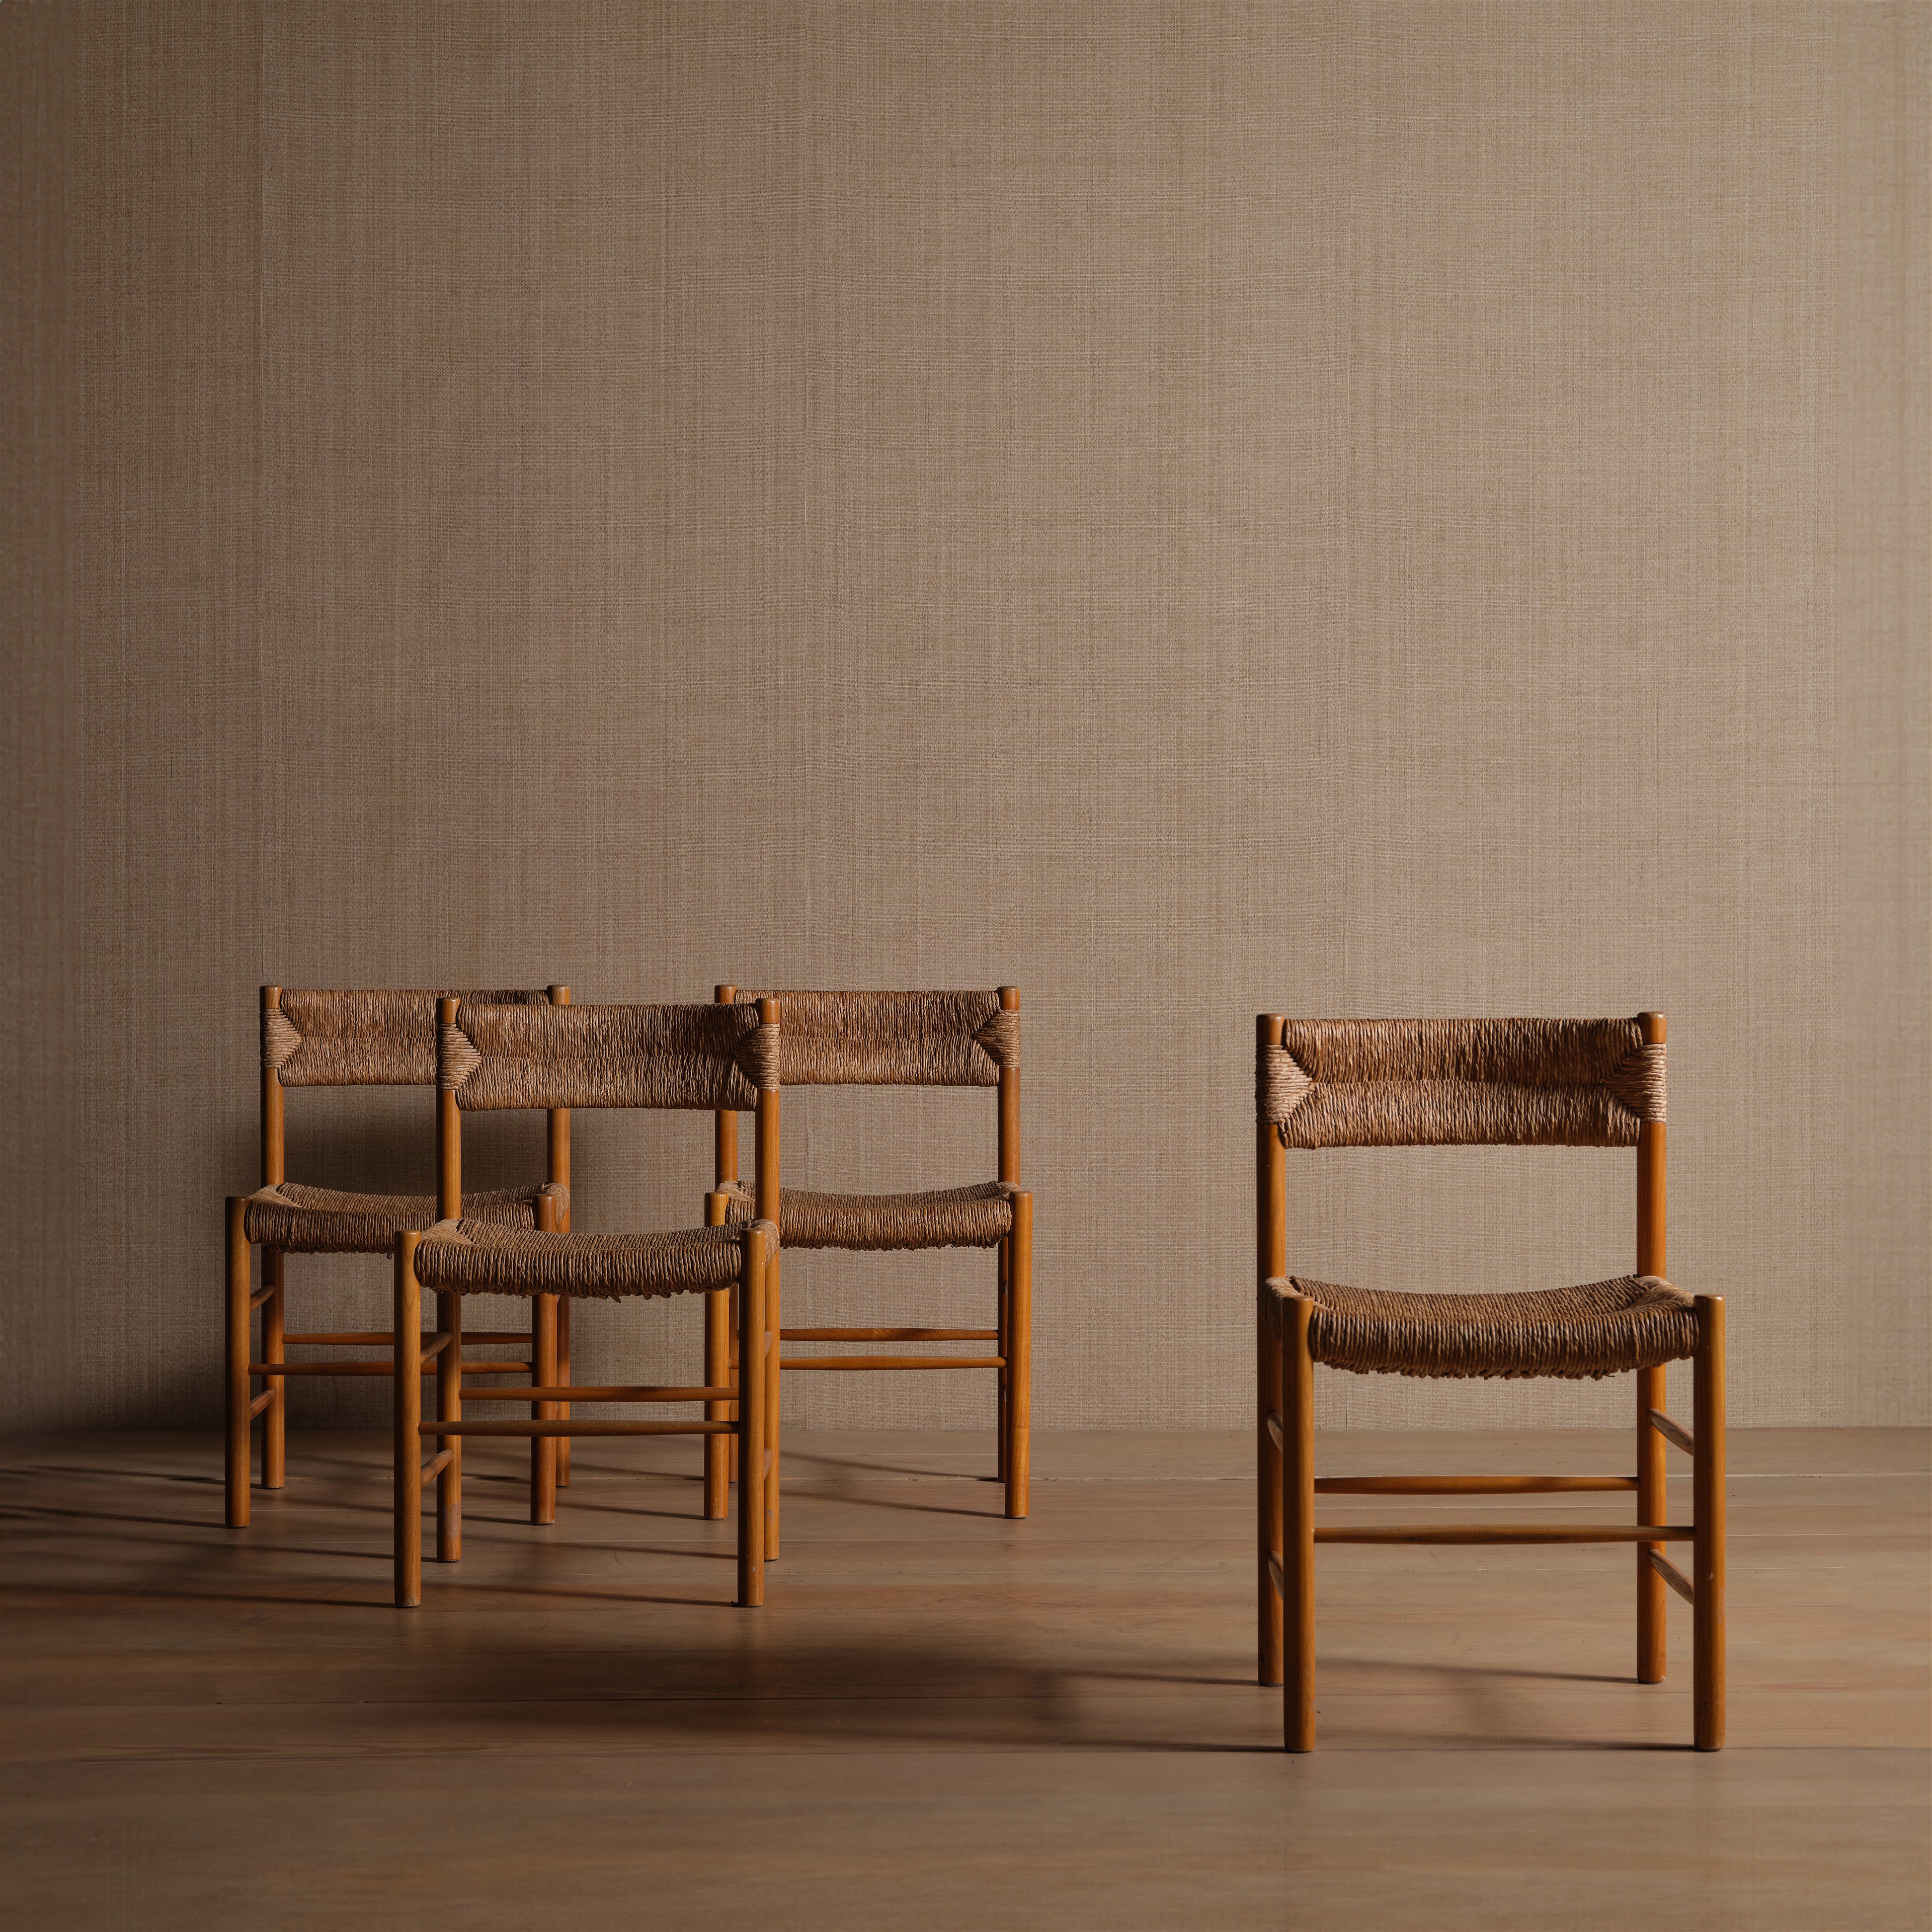 a group of four chairs sitting on top of a wooden floor